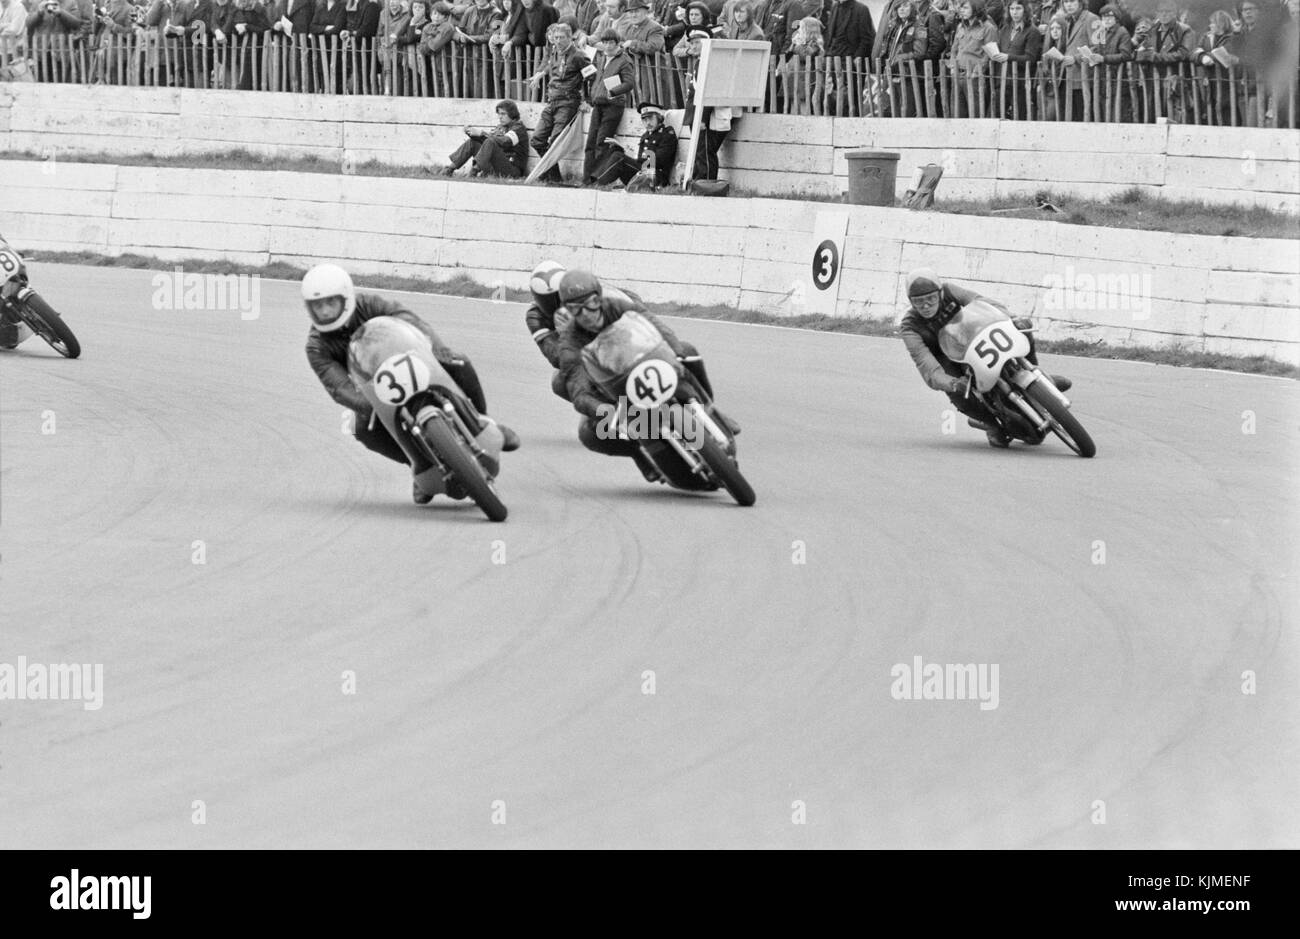 Motorcycle racing at Crystal Palace in England in 1972. This was the final year of racing at this circuit, and the circuit was closed in 1974 due to safety concerns. Stock Photo